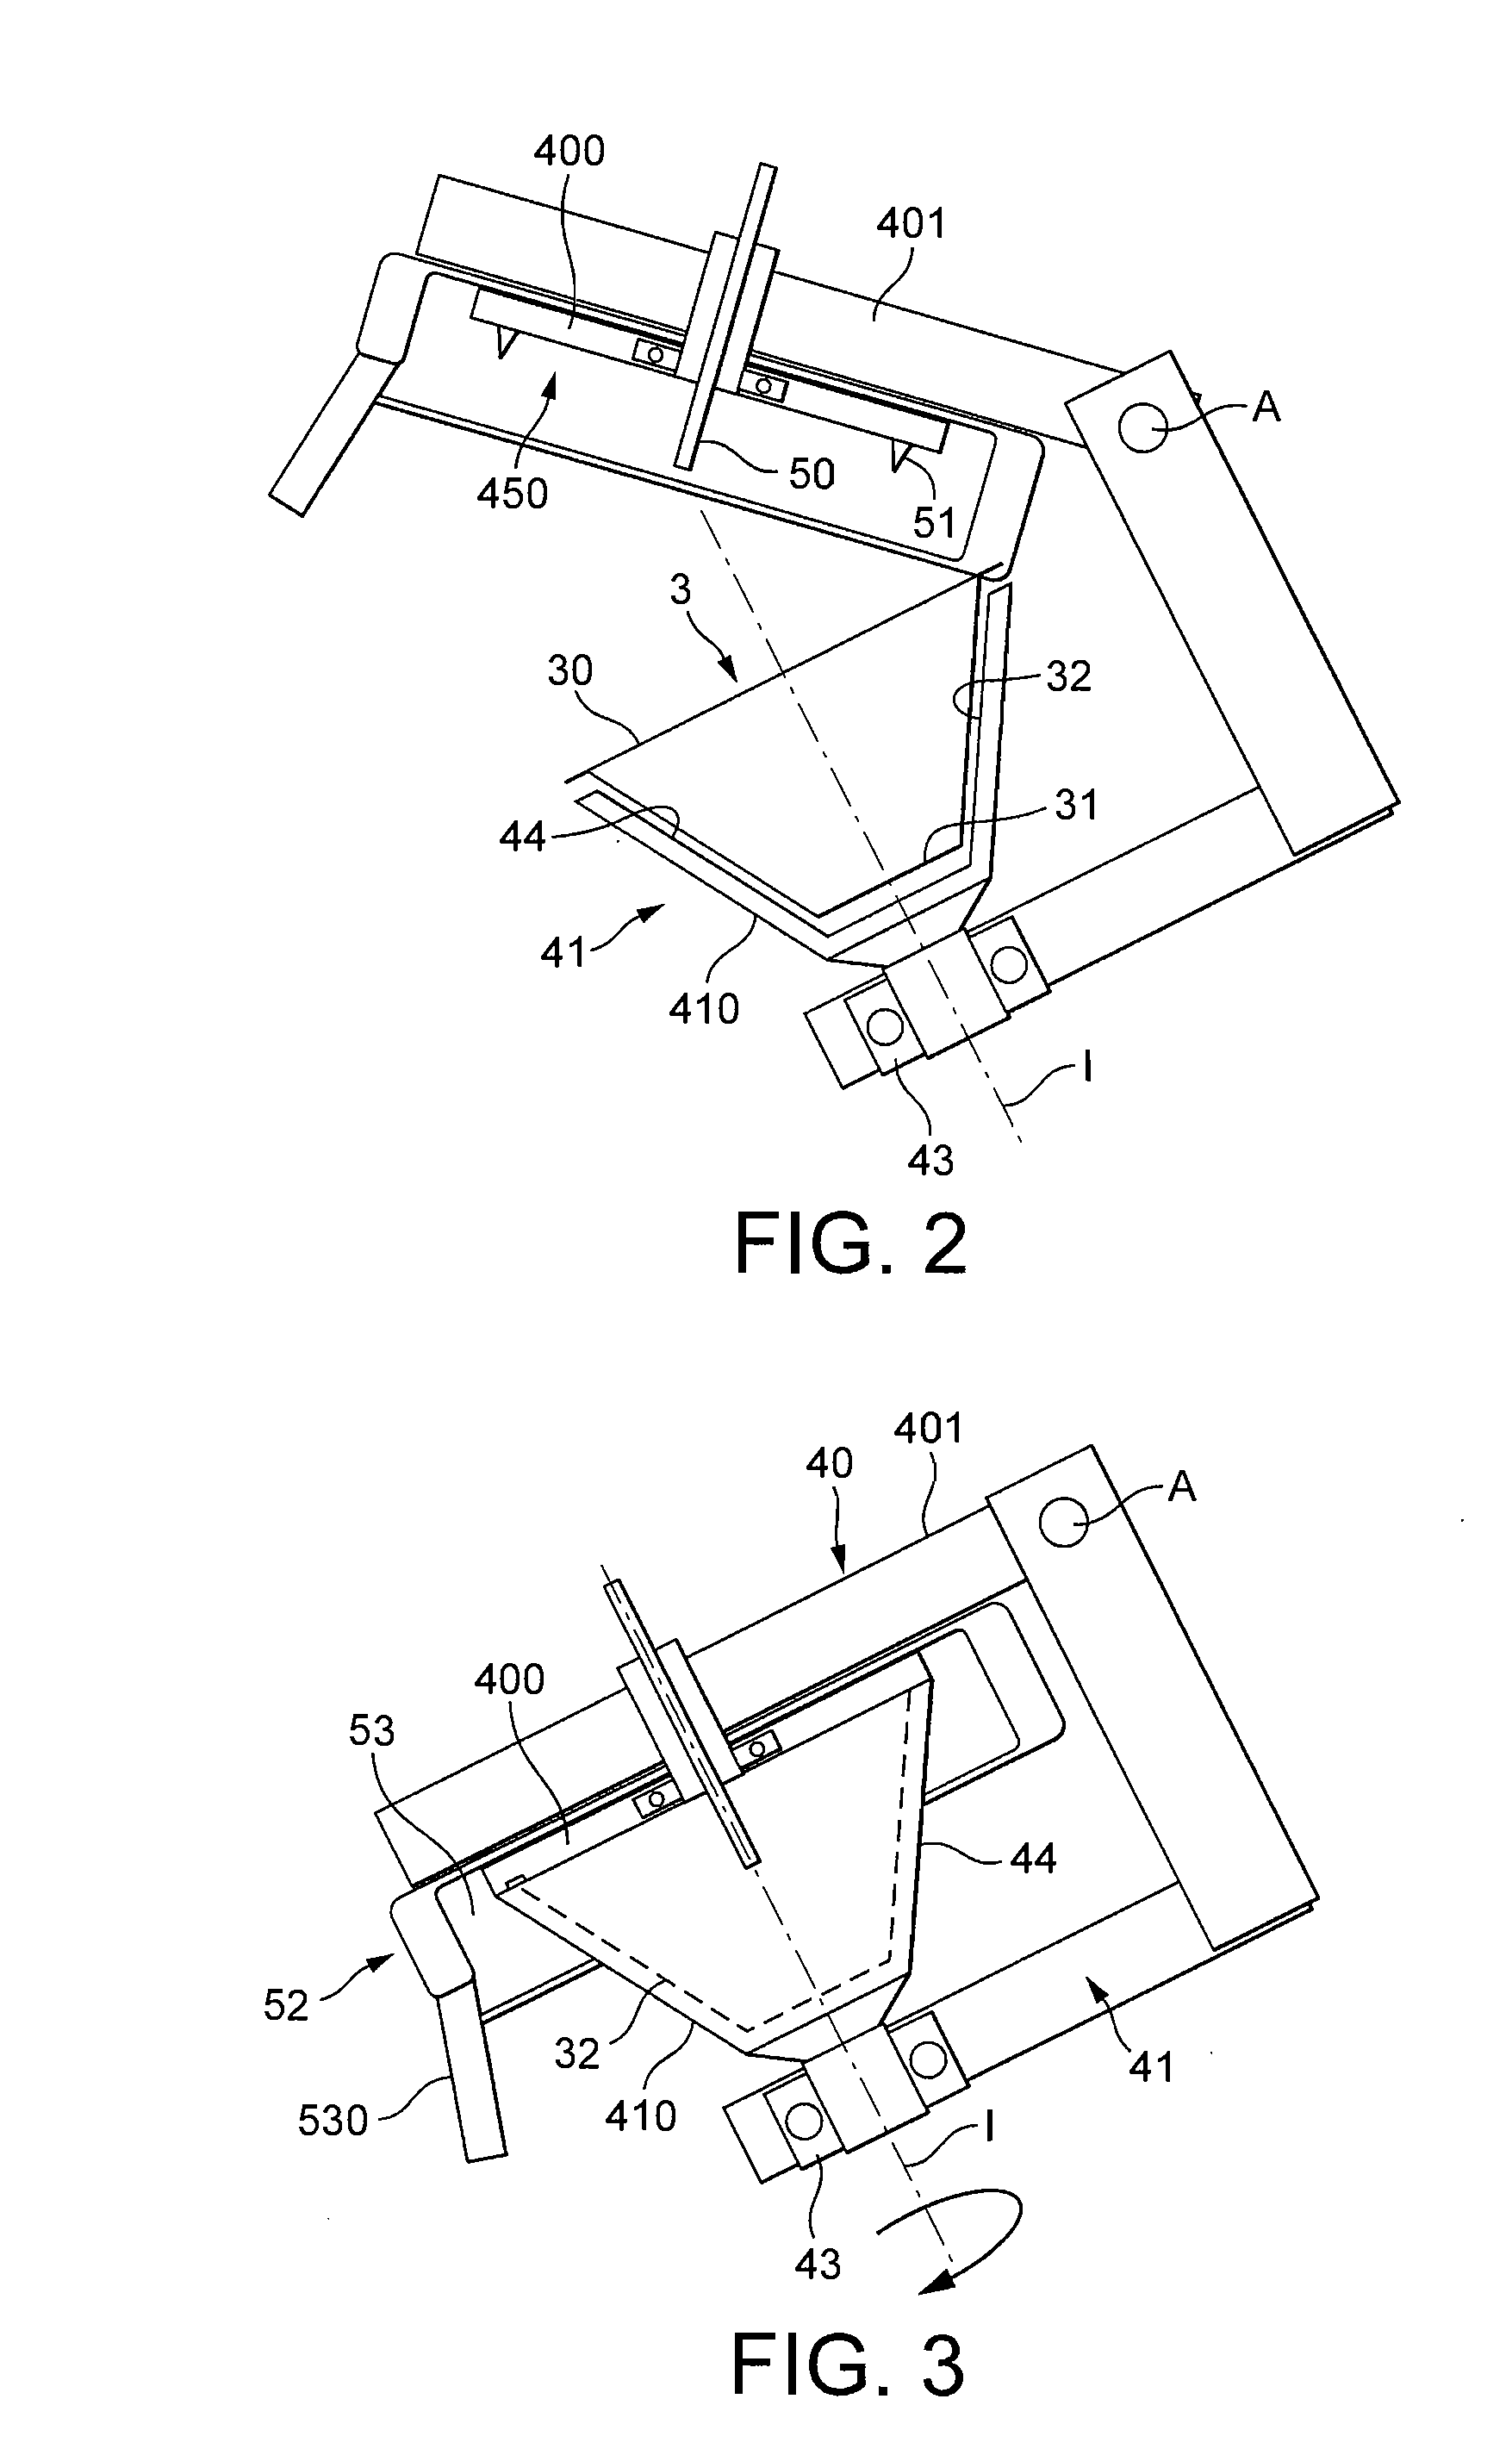 Method for preparing a beverage or food liquid and system using brewing centrifugal force